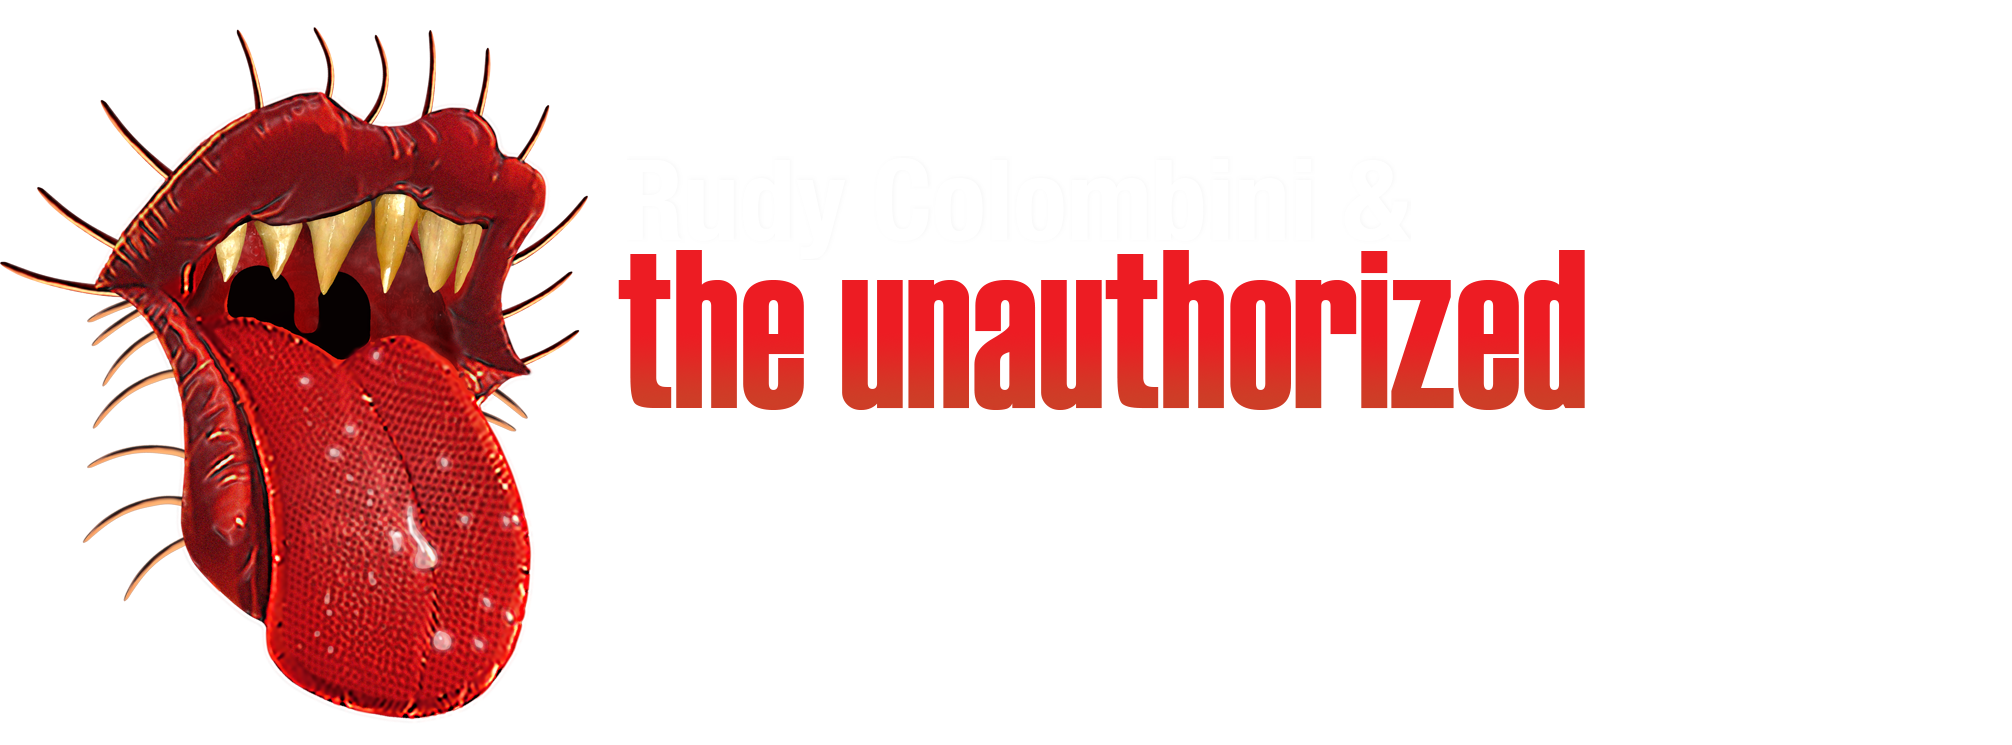 the unauthorized rolling stones png logo #3446